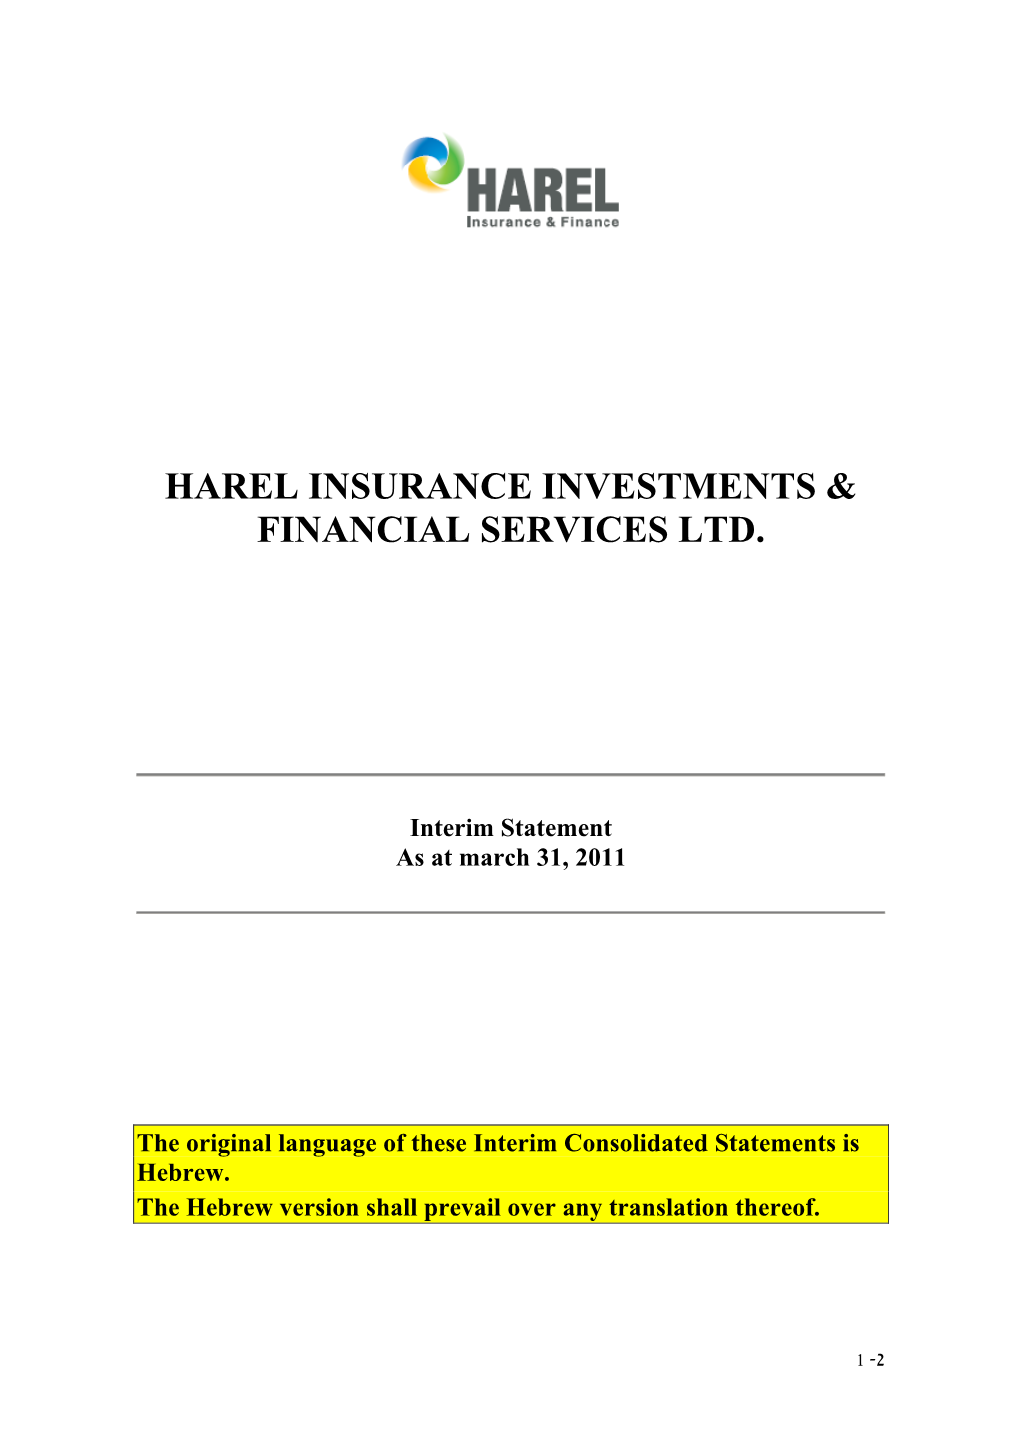 Harel Insurance Investments & Financial Services Ltd